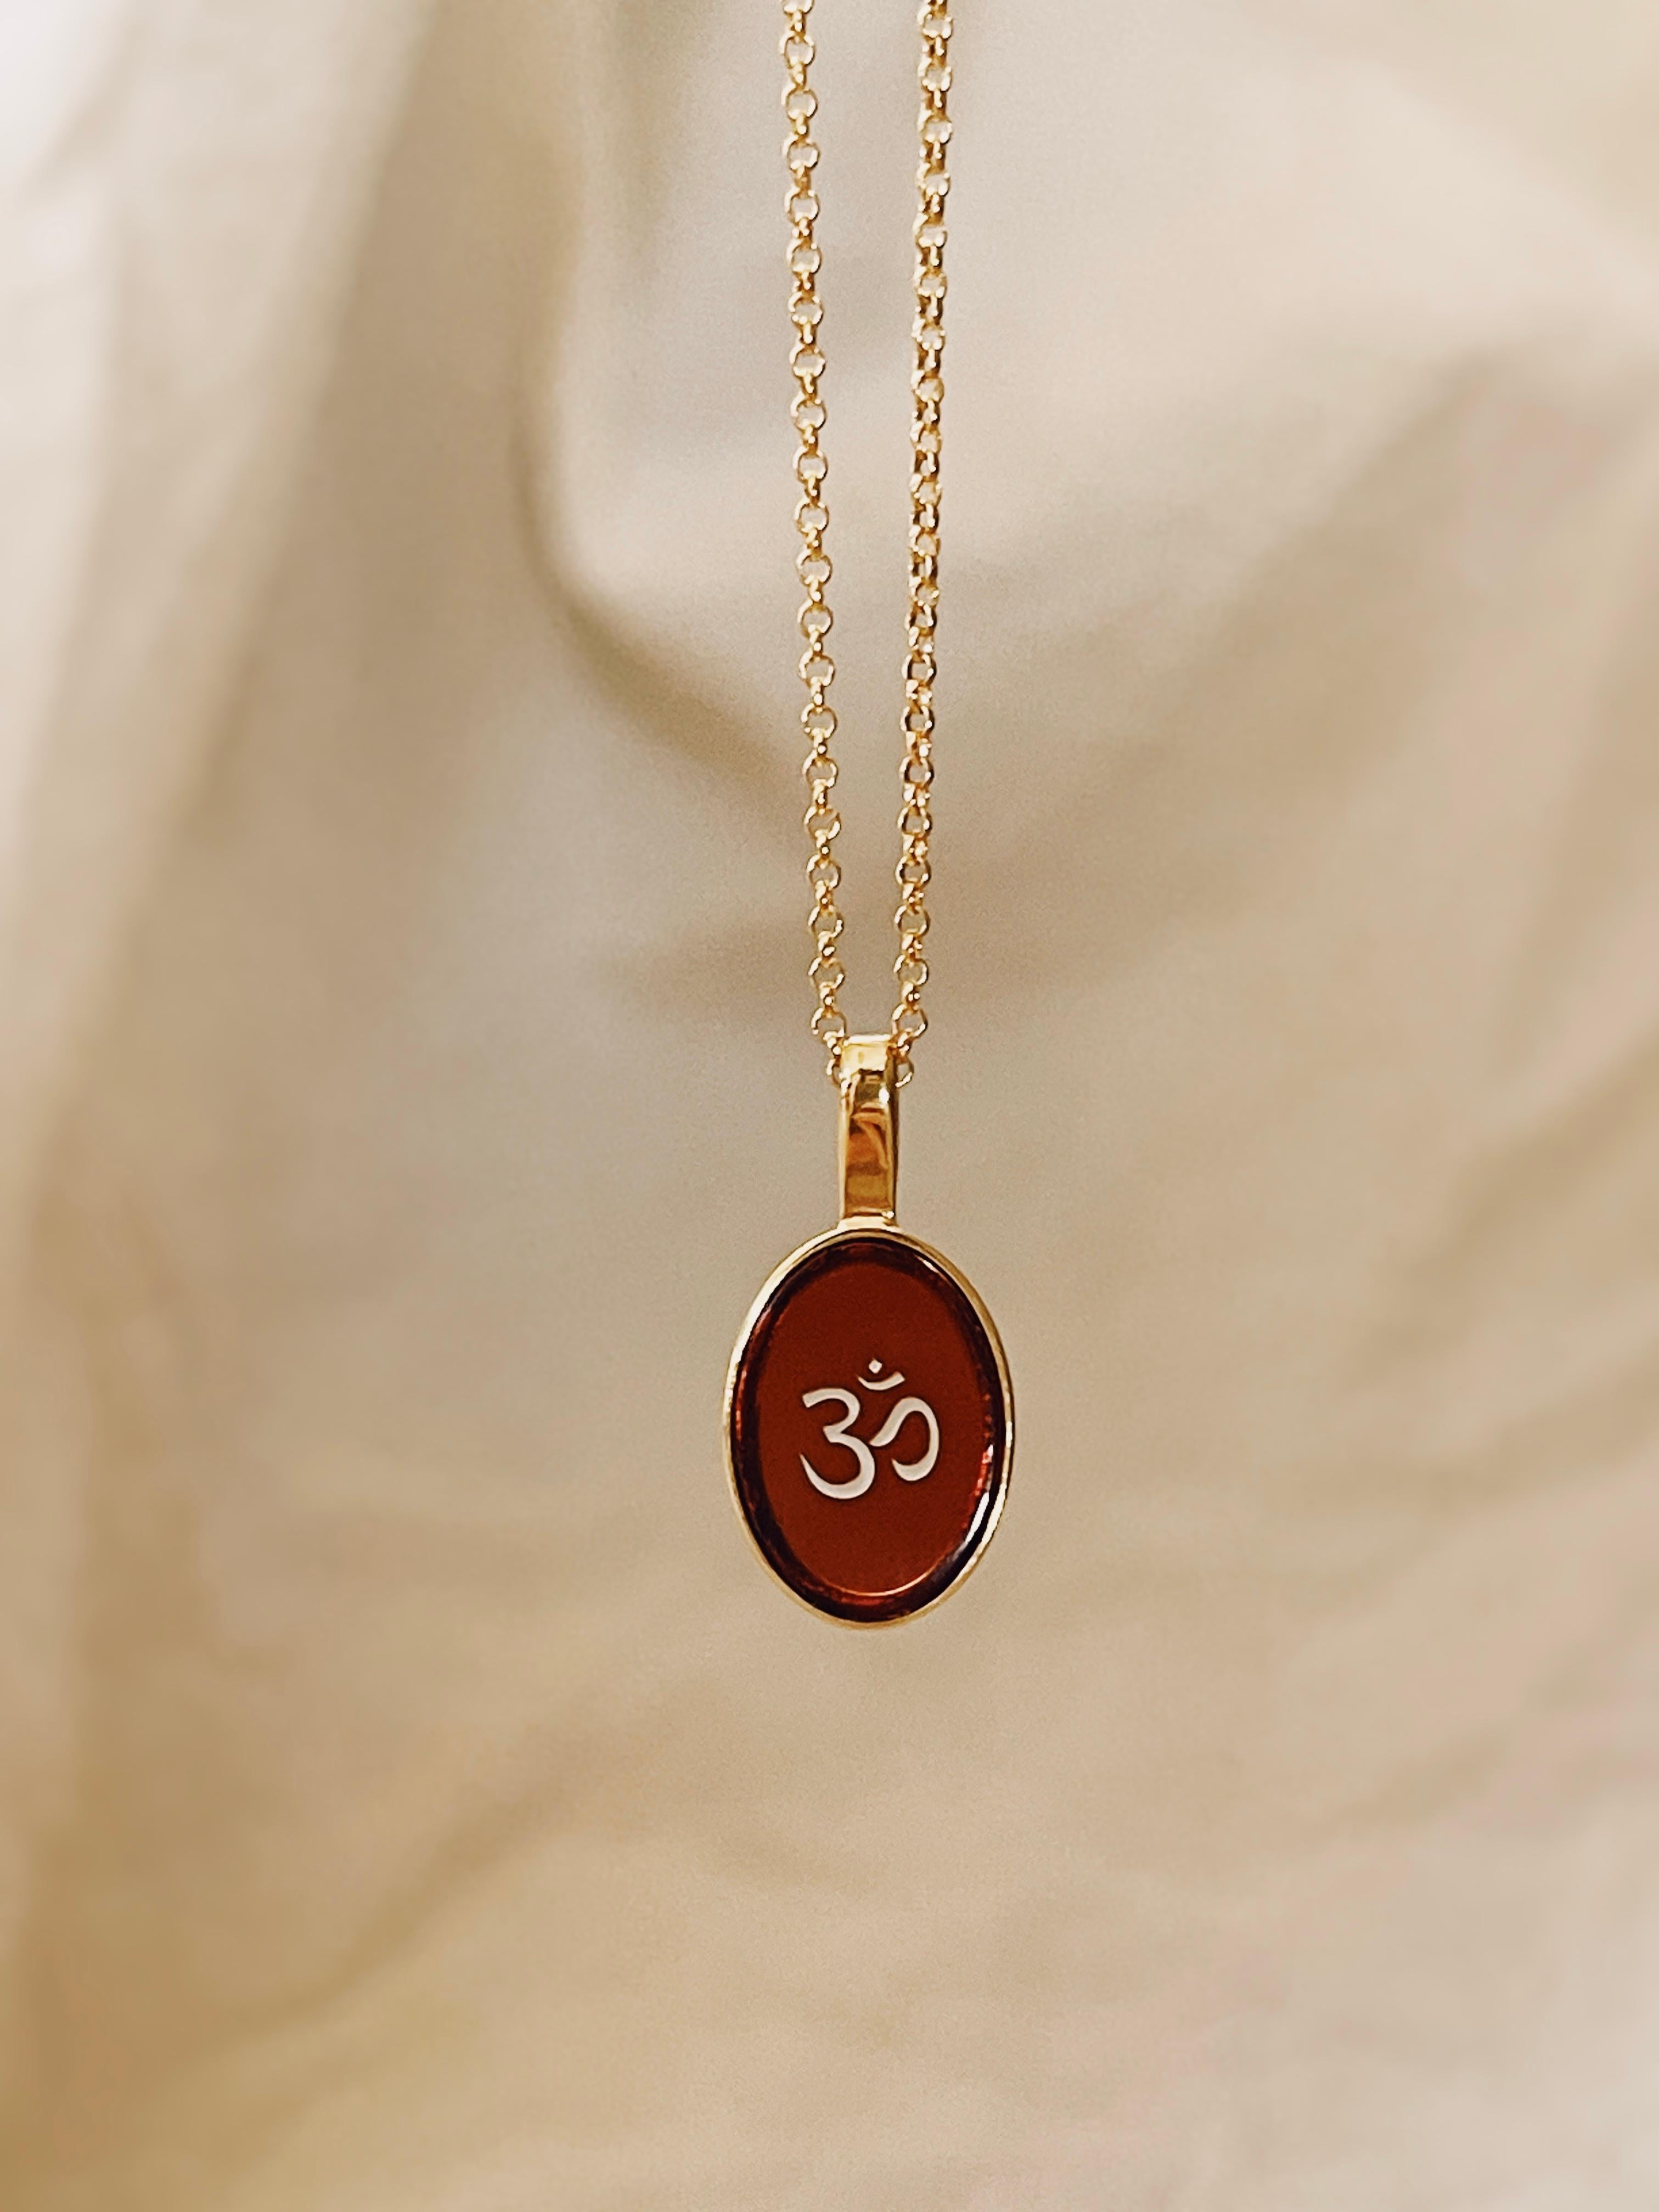 Baltic amber has been famous for its properties for centuries - it promotes health and happiness. Initials express the powers of the names. Our medallions are the perfect combination. They are amulets manifesting the strength of your personality or